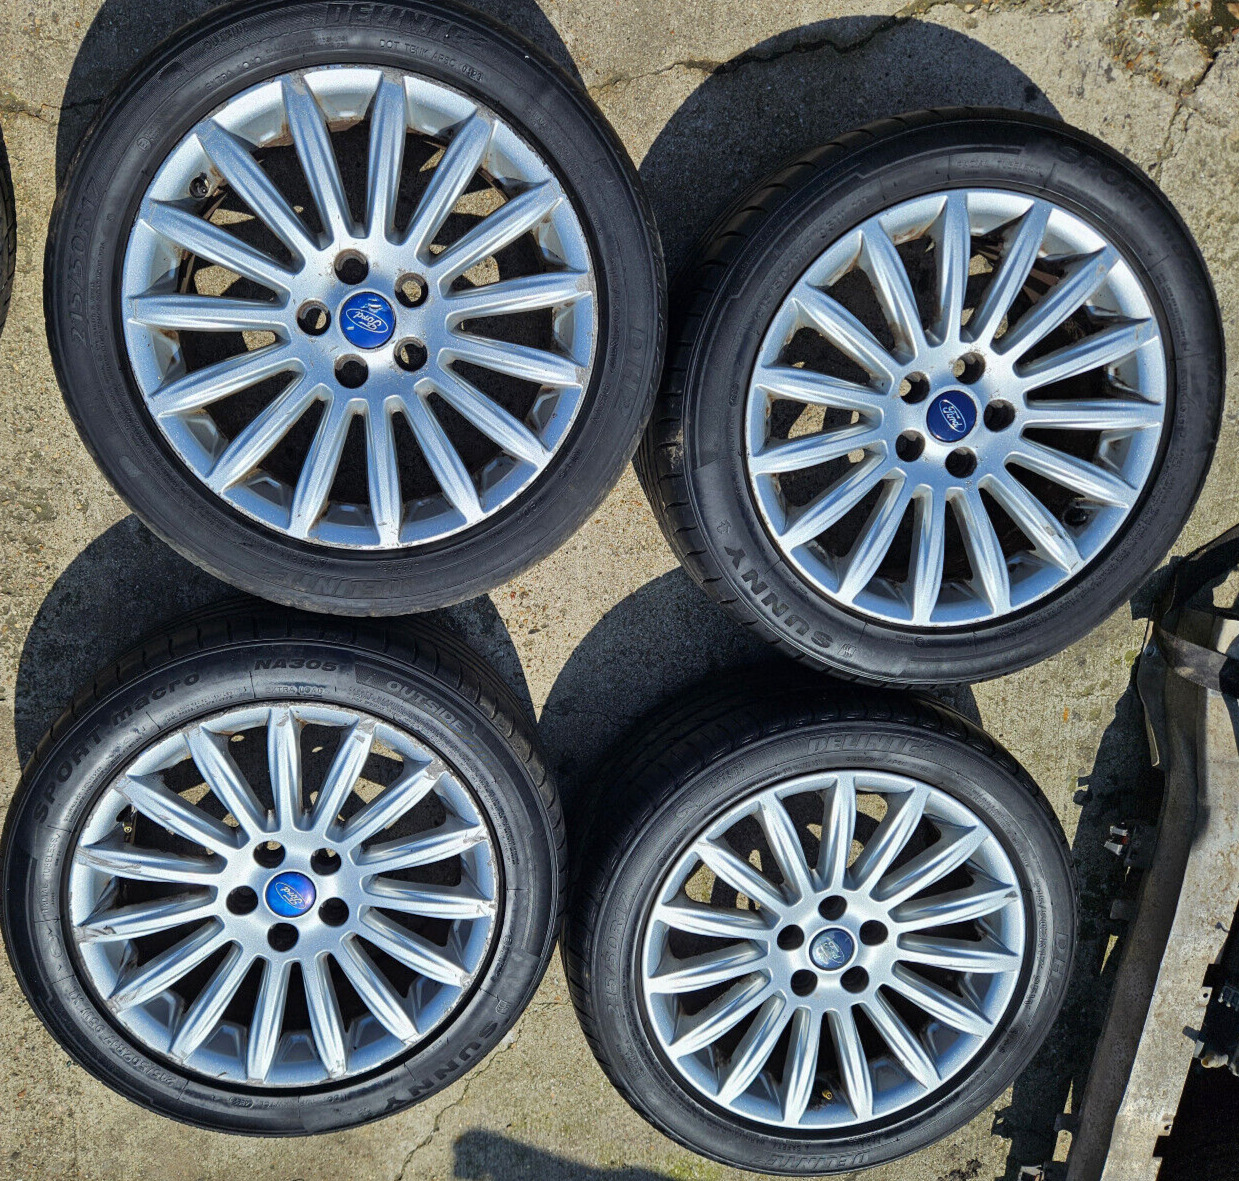 FORD MONDEO FOCUS 17 INCH ALLOY WHEELS + TYRES 215 50 17